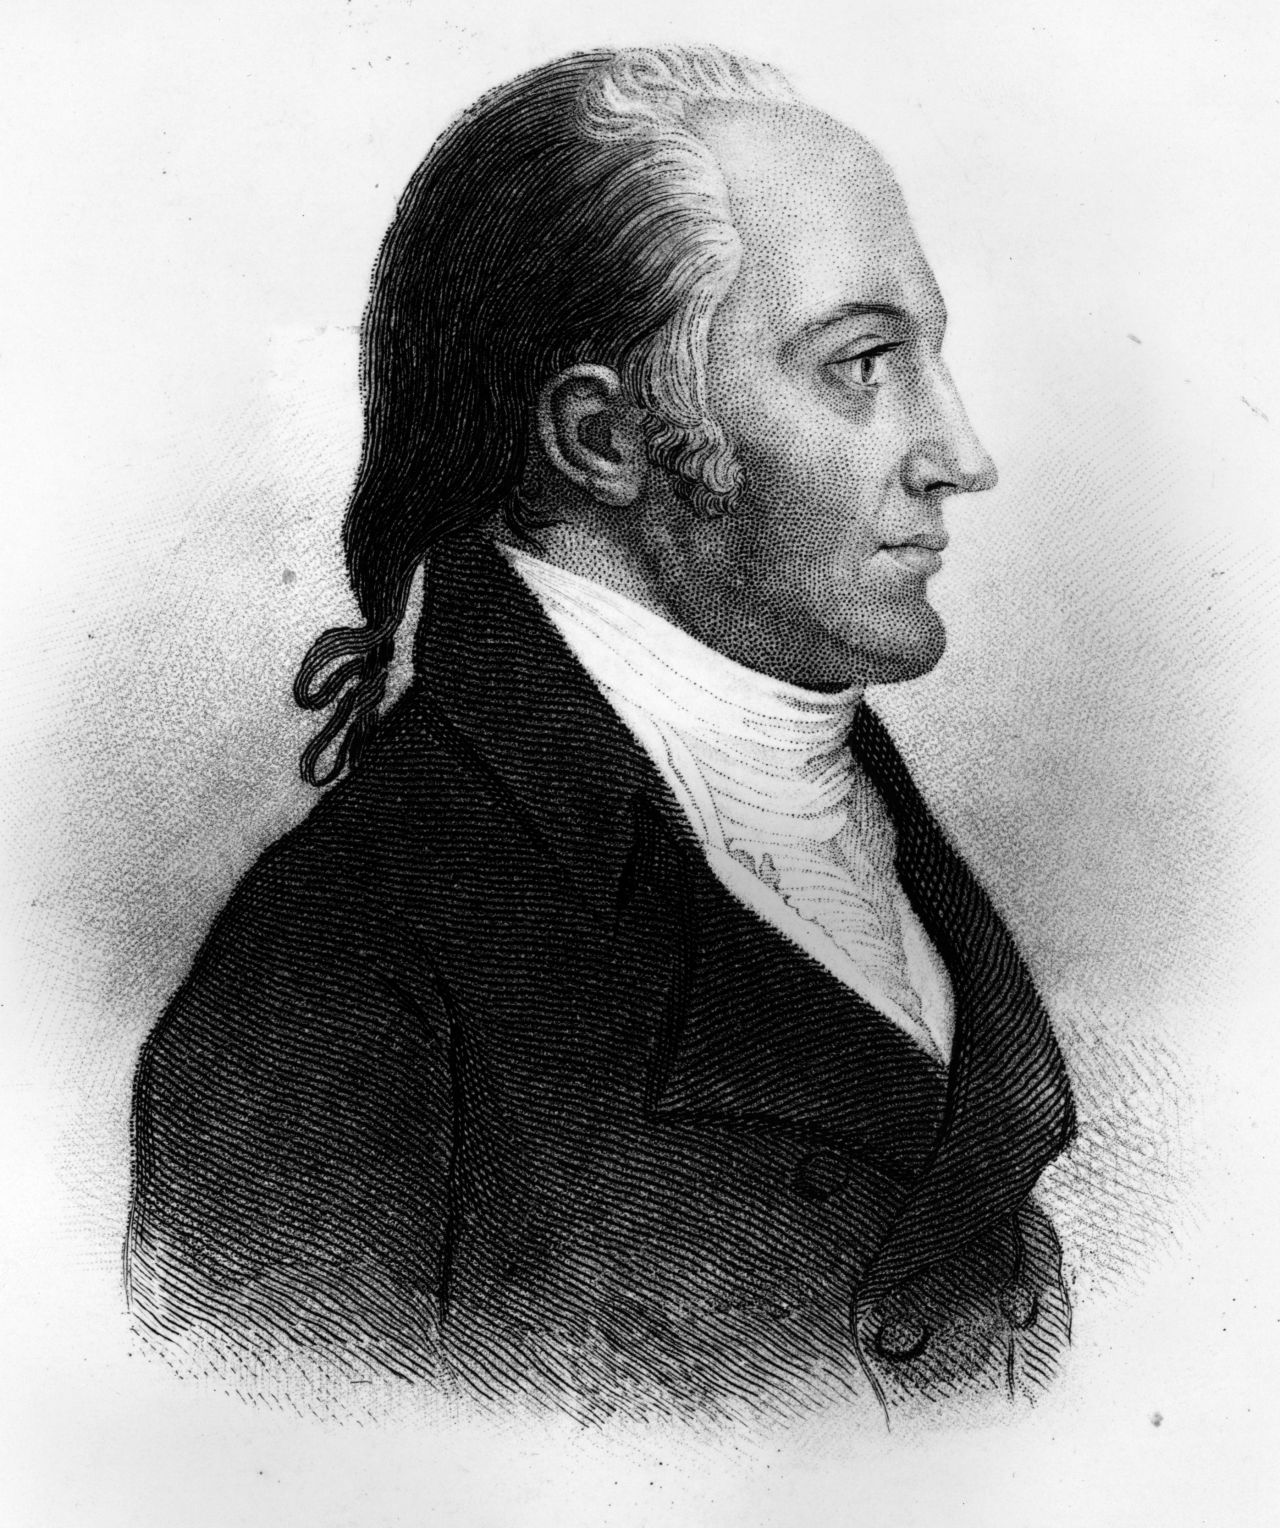 Circa 1800: American statesman Aaron Burr (1756 - 1836). Vice President to Thomas Jefferson, he mortally wounded his rival, Alexander Hamilton, in a duel and died in disgrace.